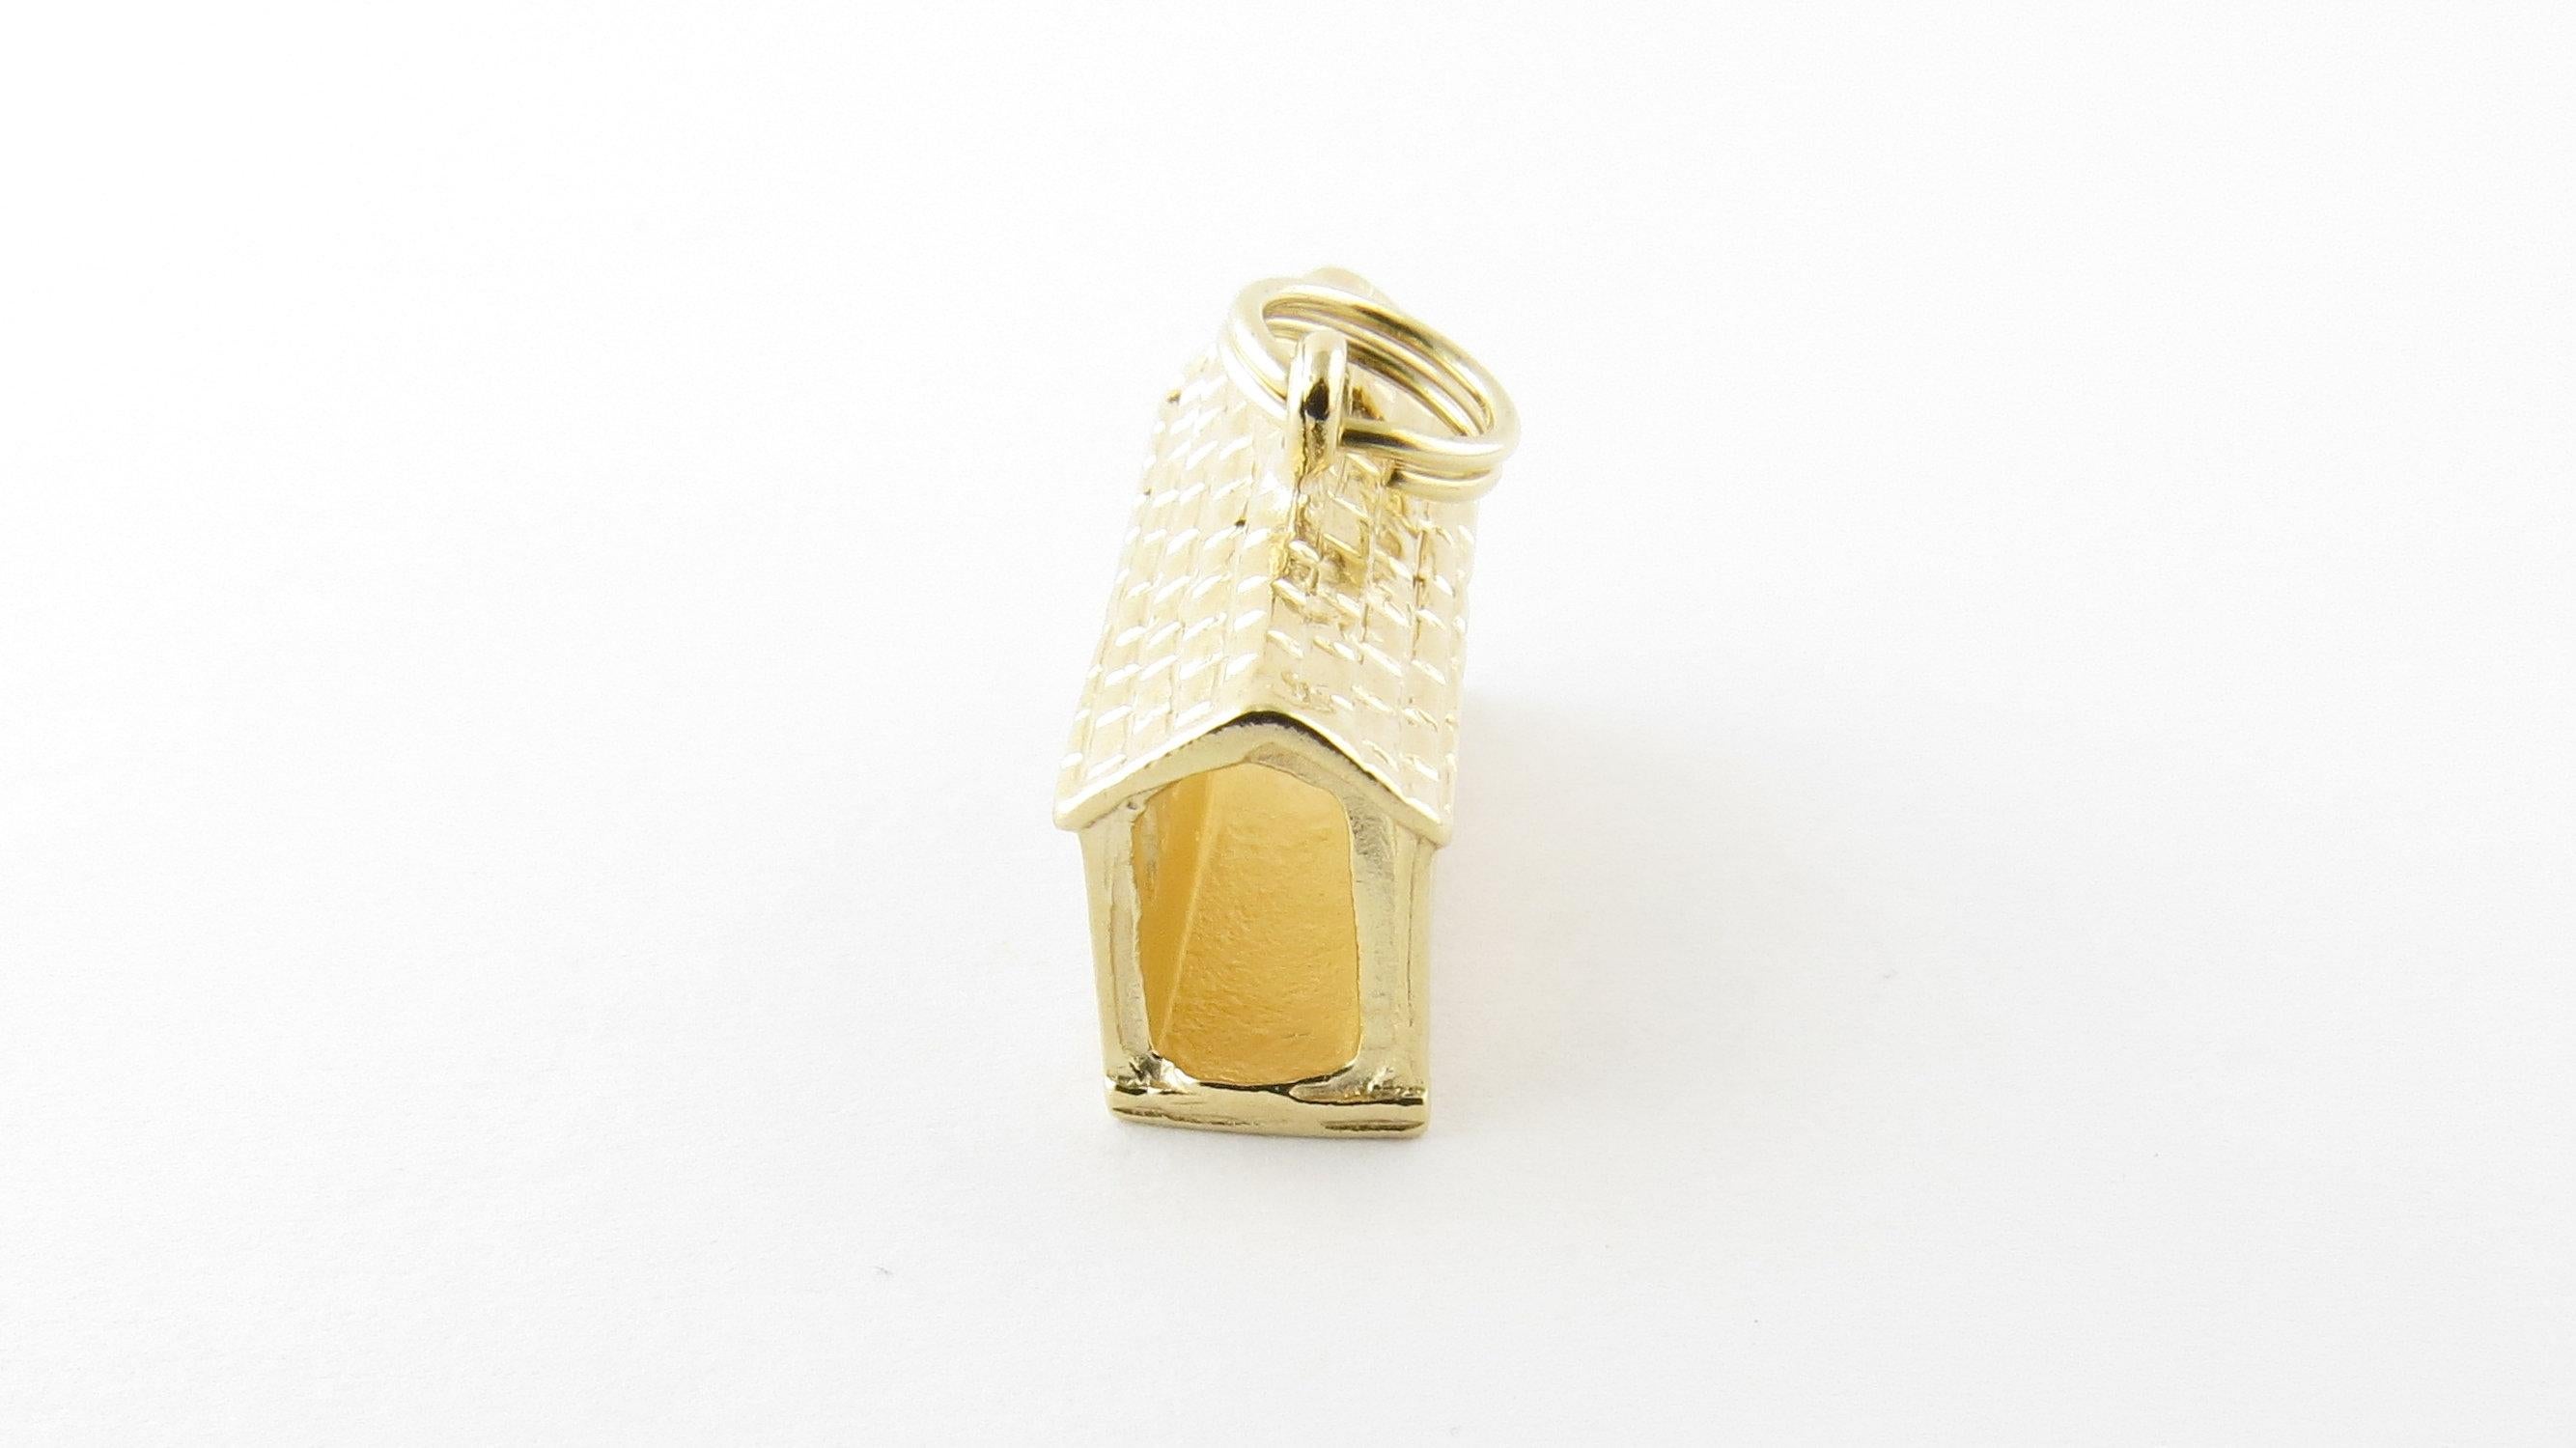 Vintage 14 Karat Yellow Gold Covered Bridge Charm- Bring back those peaceful days in the country! This lovely 3D charm features a miniature covered bridge beautifully detailed in 14K yellow gold. Size: 14 mm x 18 mm (actual charm) Weight: 2.4 dwt. /